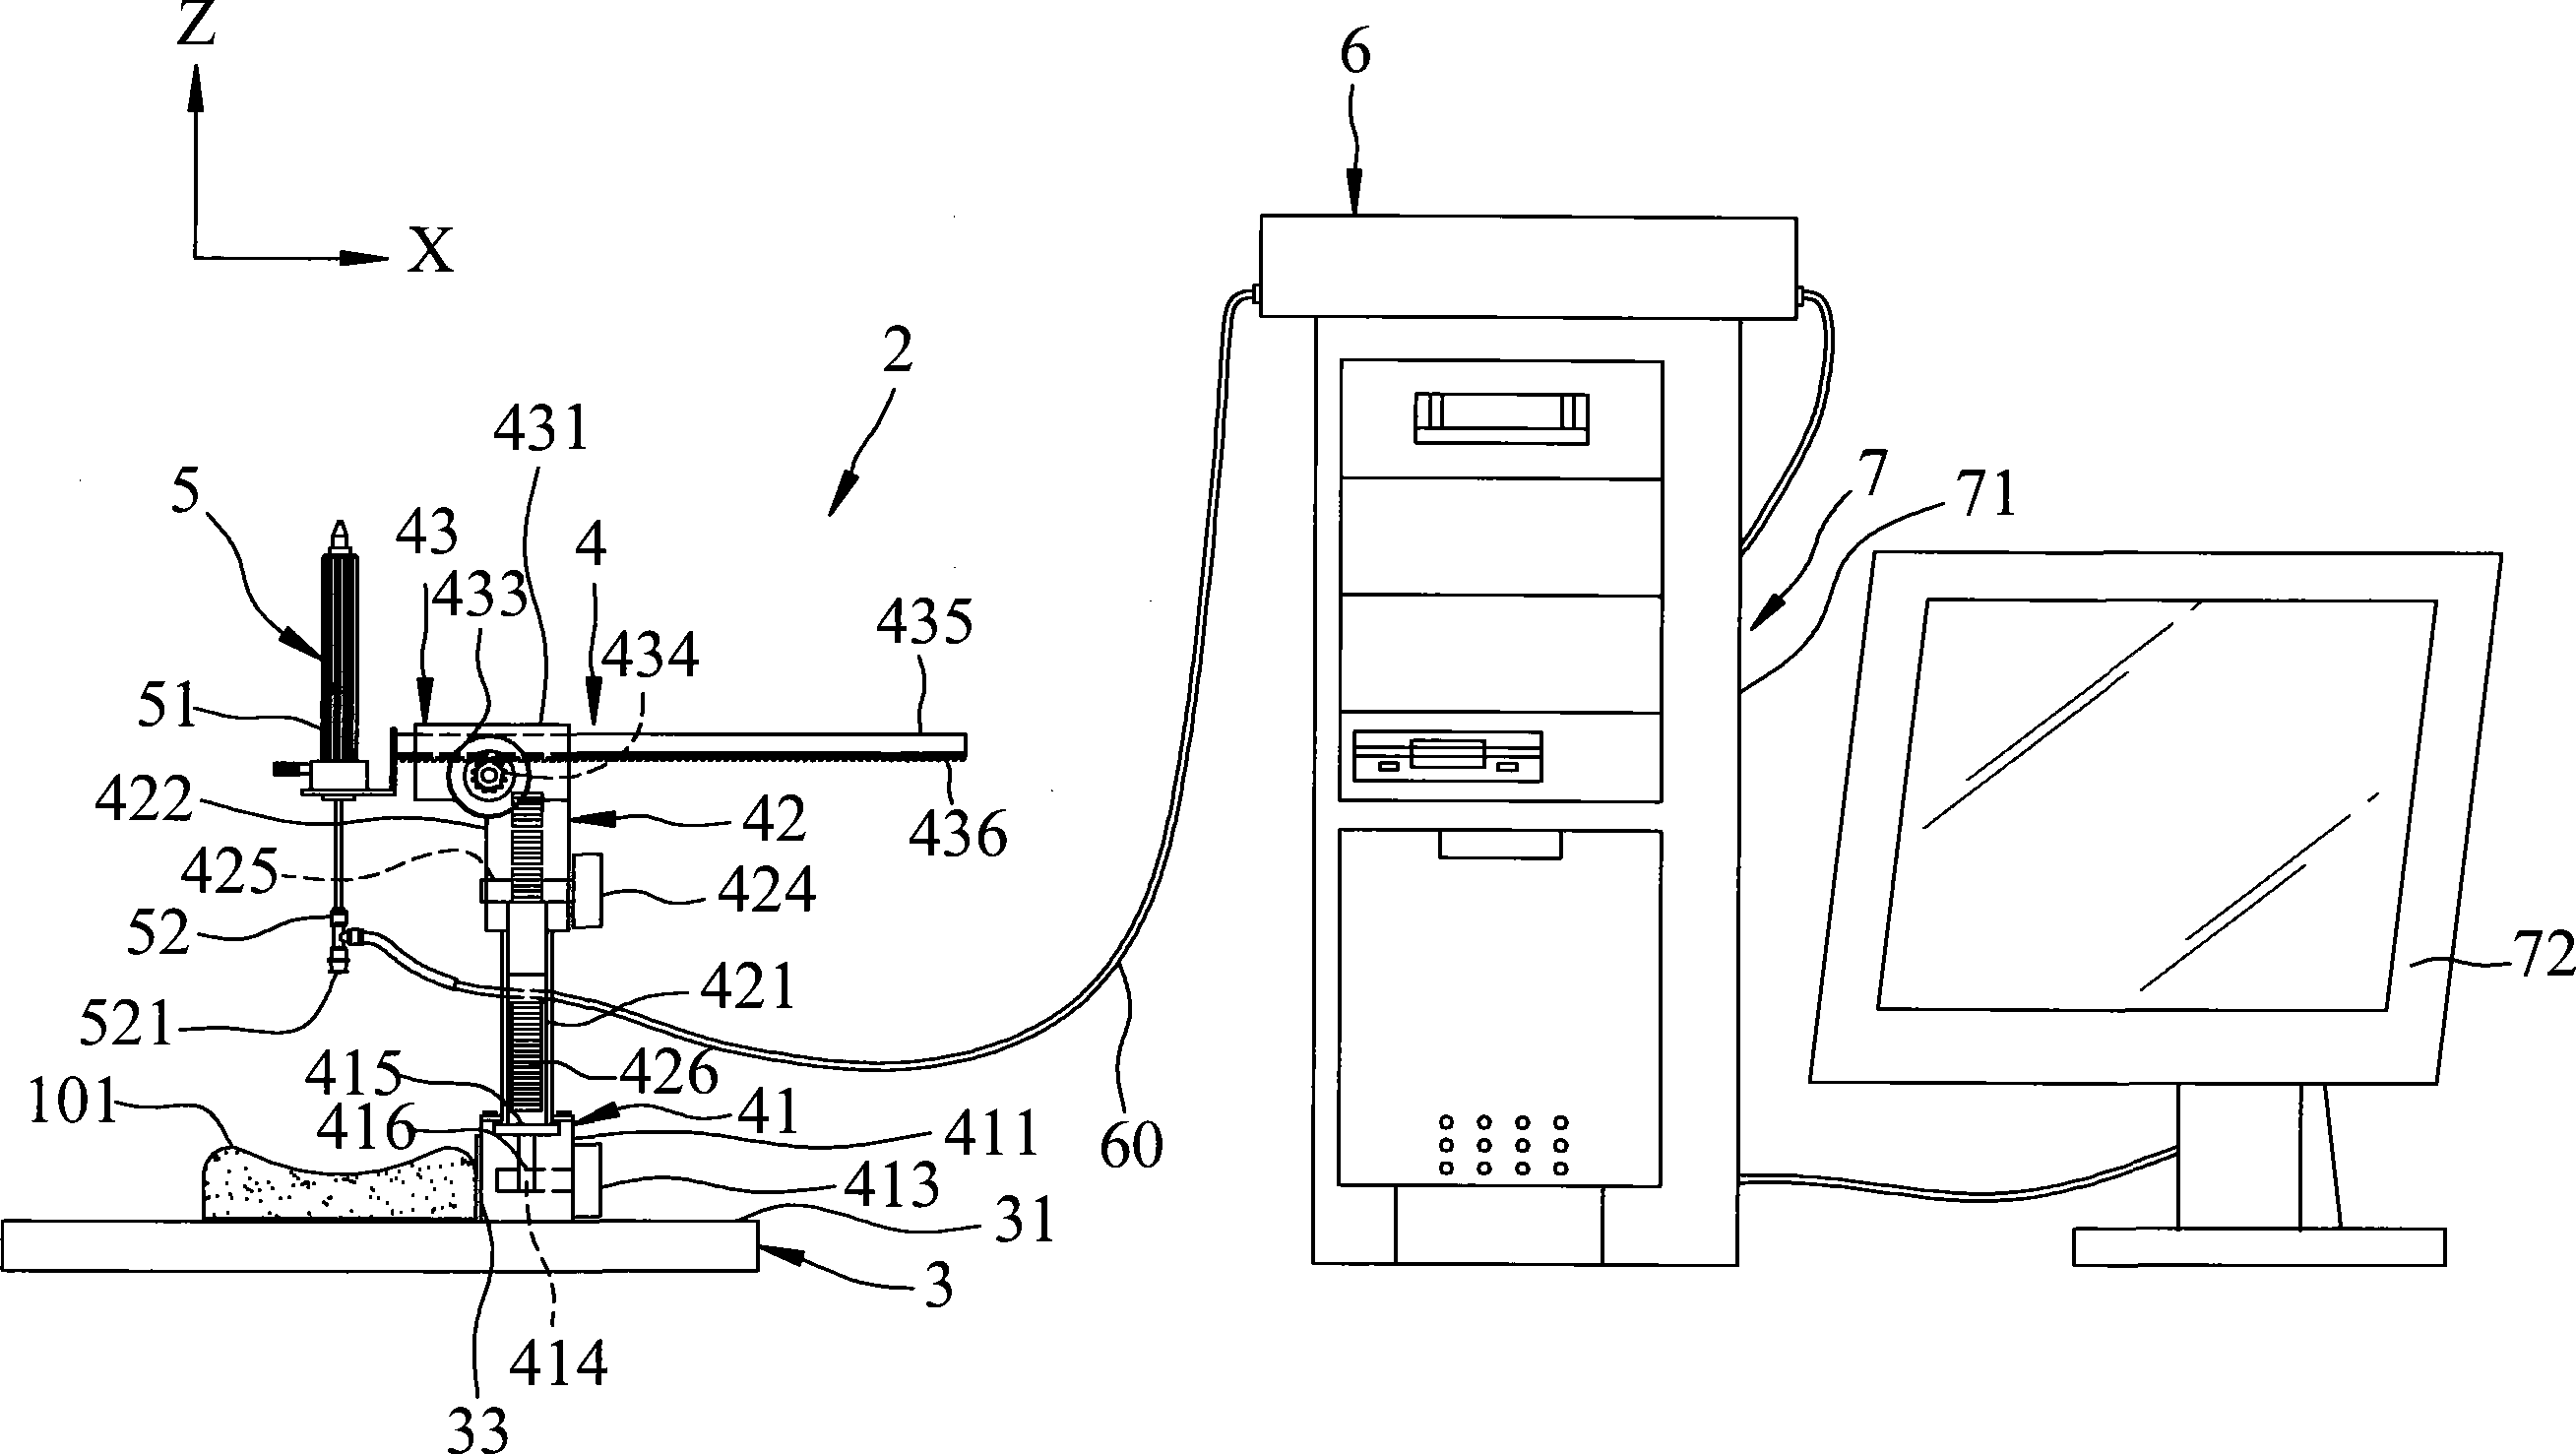 Pulse-taking instrument capable of executing spectroscopic analysis